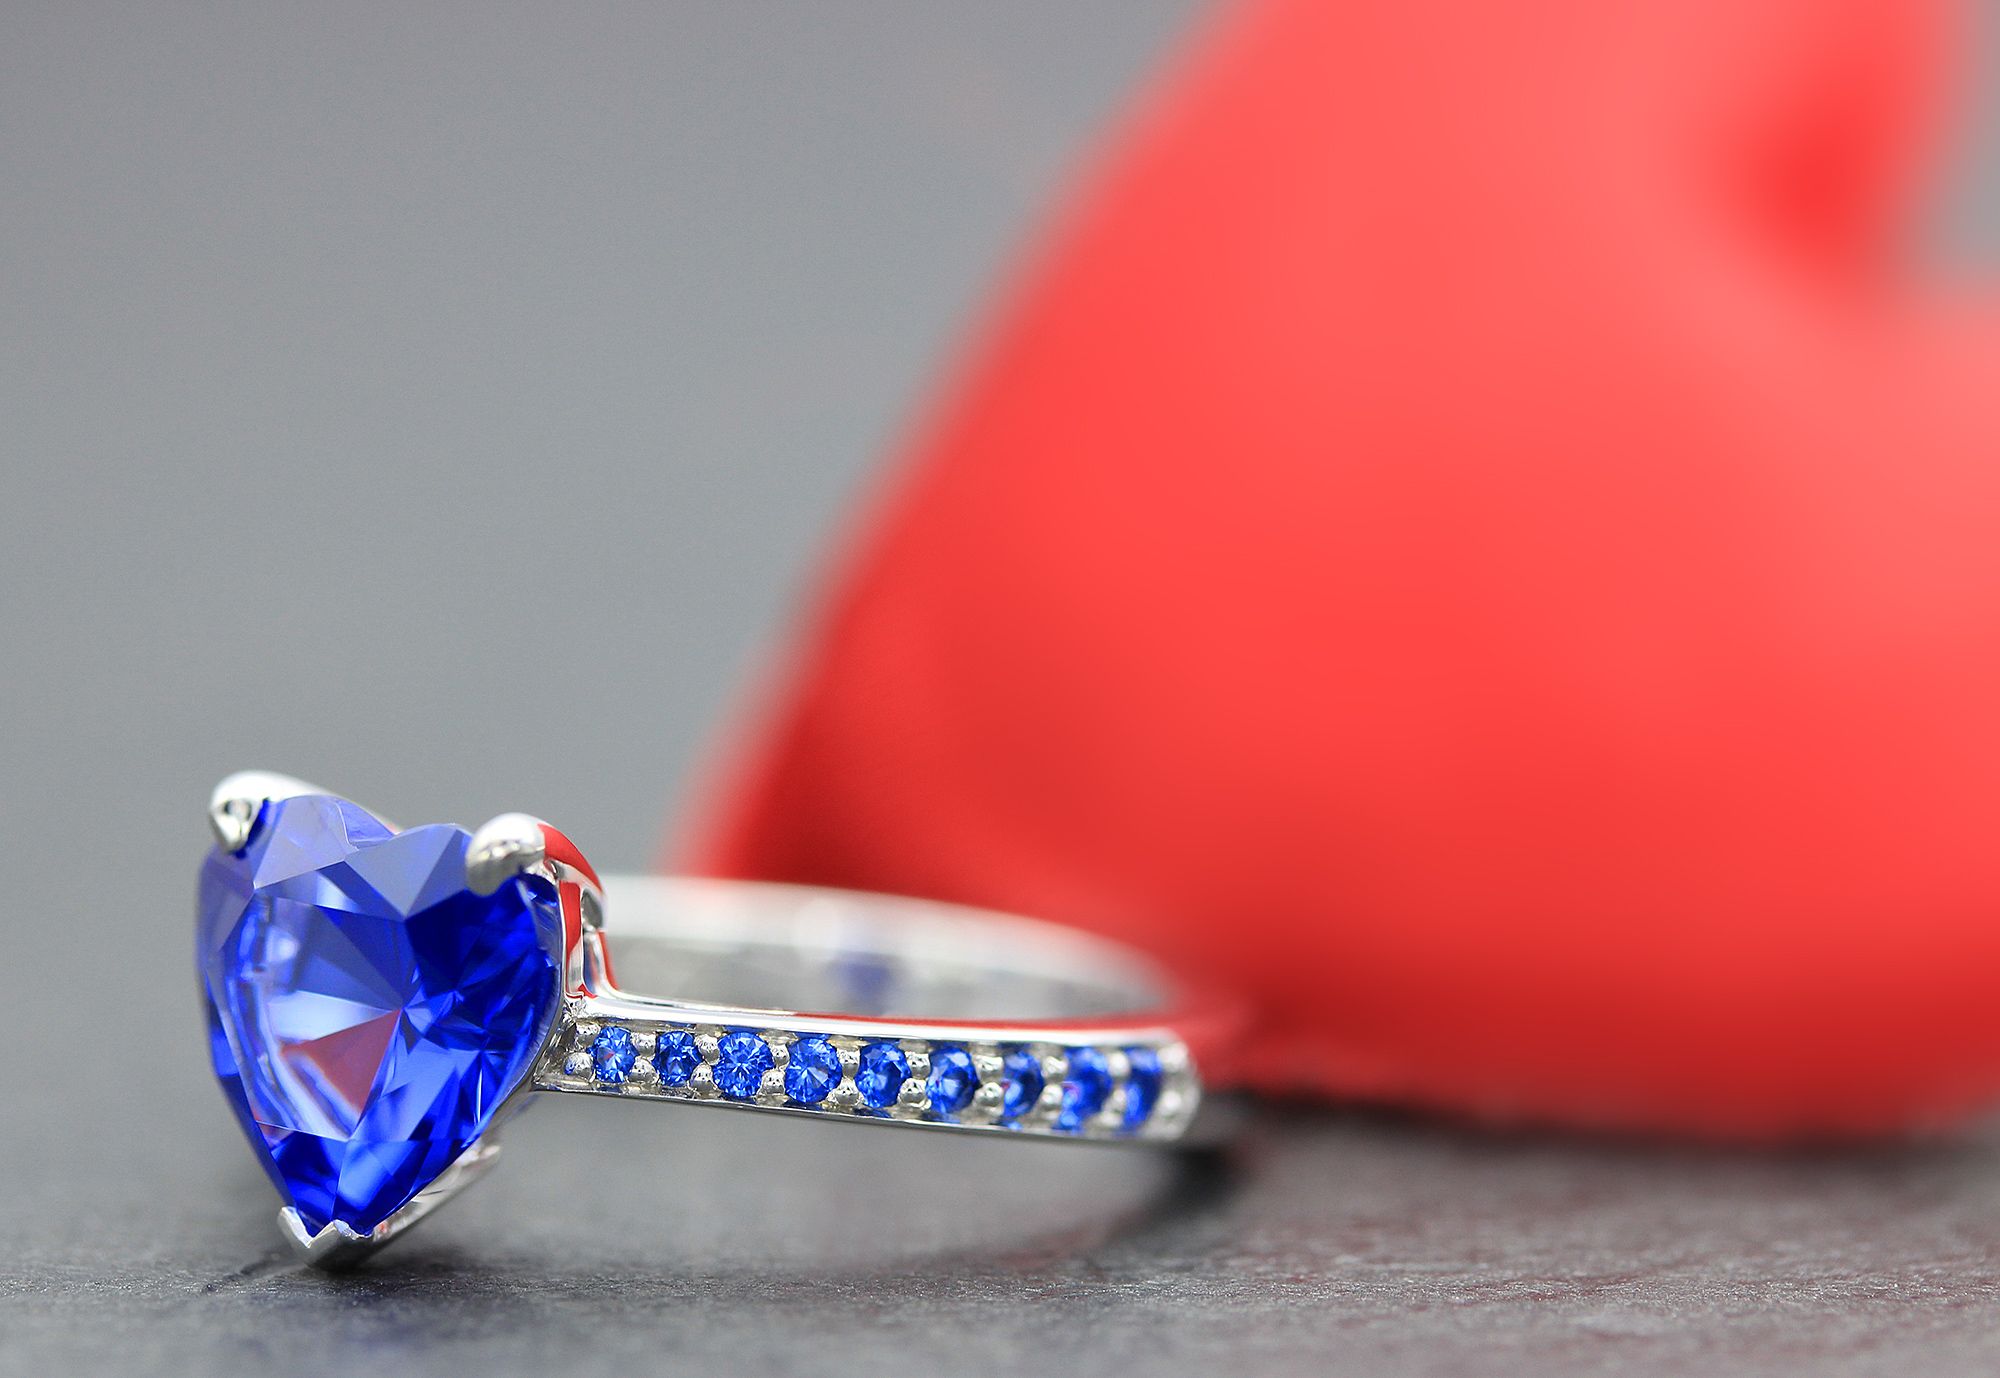 The precious ‘True-Blue’ heart ring is a symbol of harmony and trust.